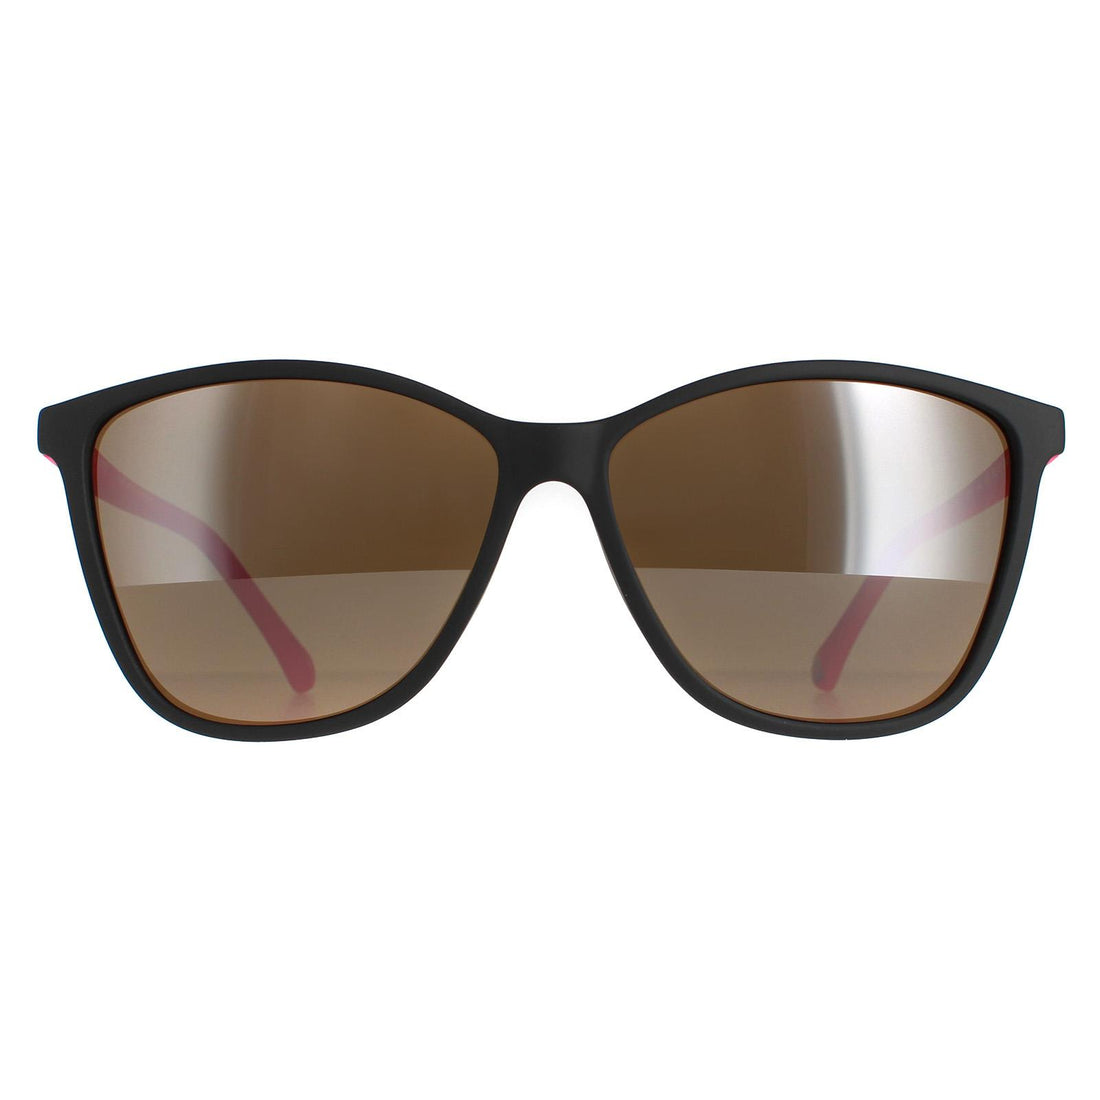 Ted Baker TB1443 Perry Sunglasses Black and Pink / Brown Grey